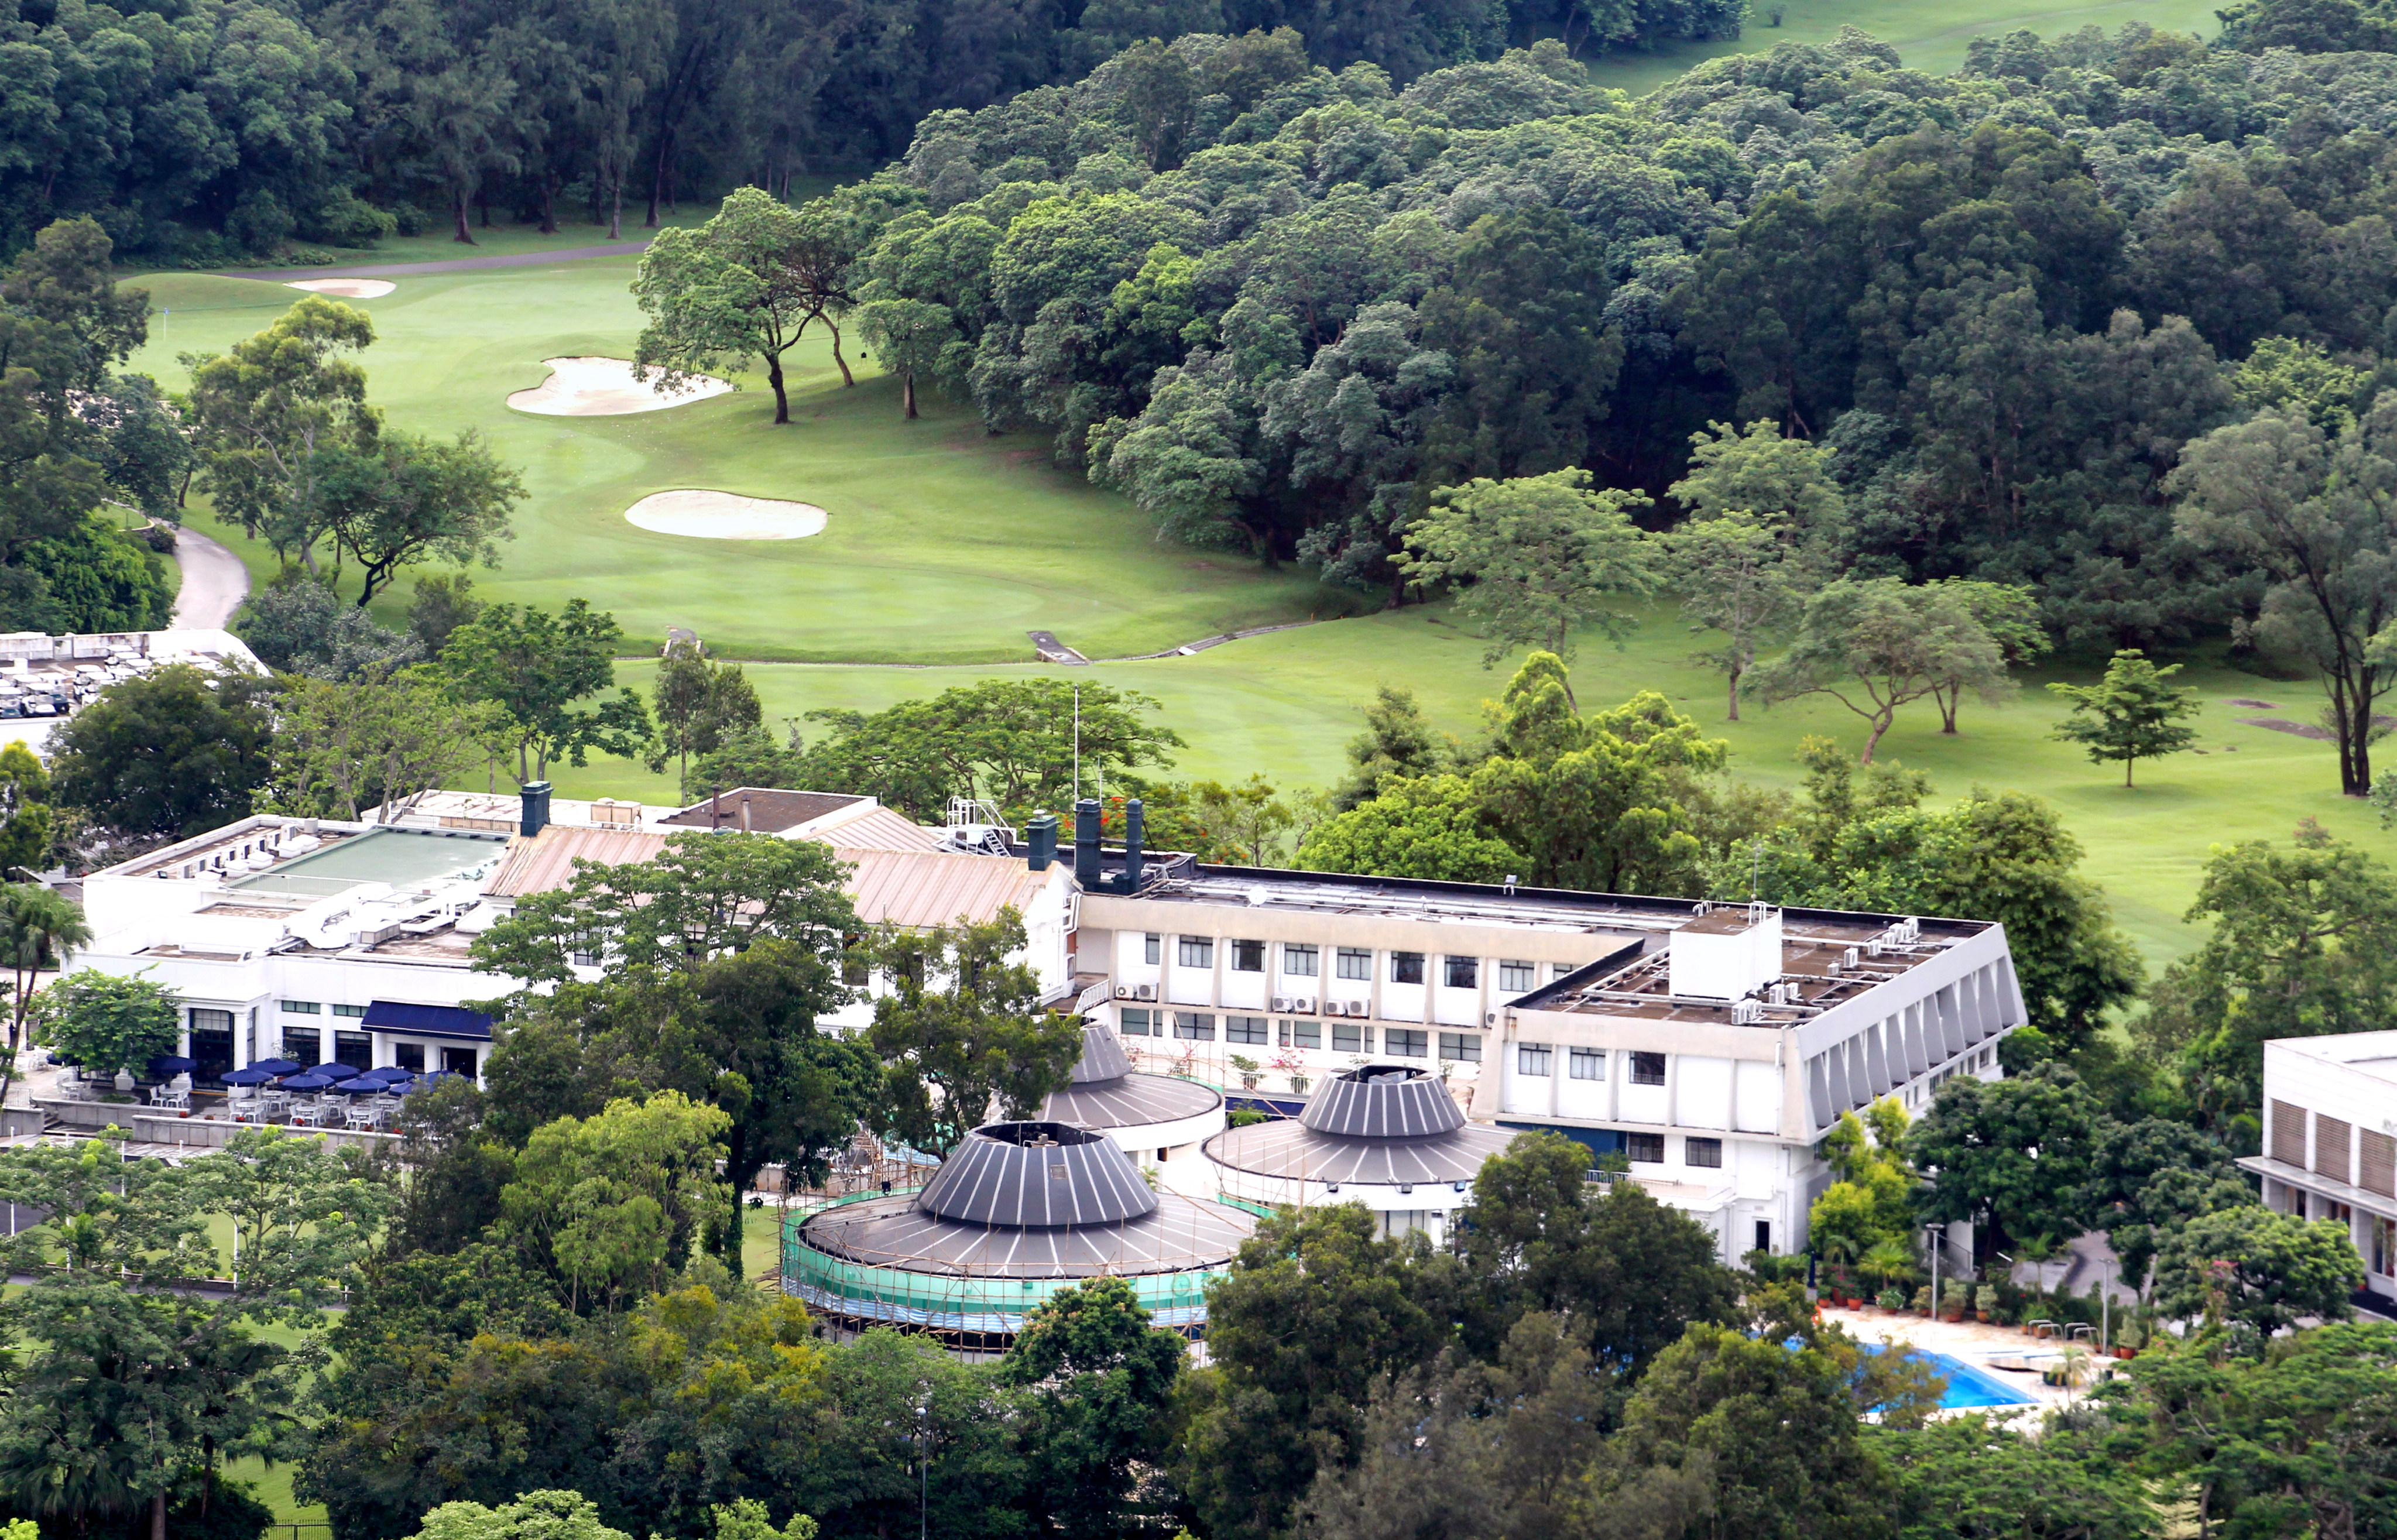 Fanling’s extensive golf courses, first laid out in 1910-11 on disused agricultural land, were part of the New Territories’ attraction for Europeans in Hong Kong a century ago – and they remain so today. Photo: SCMP